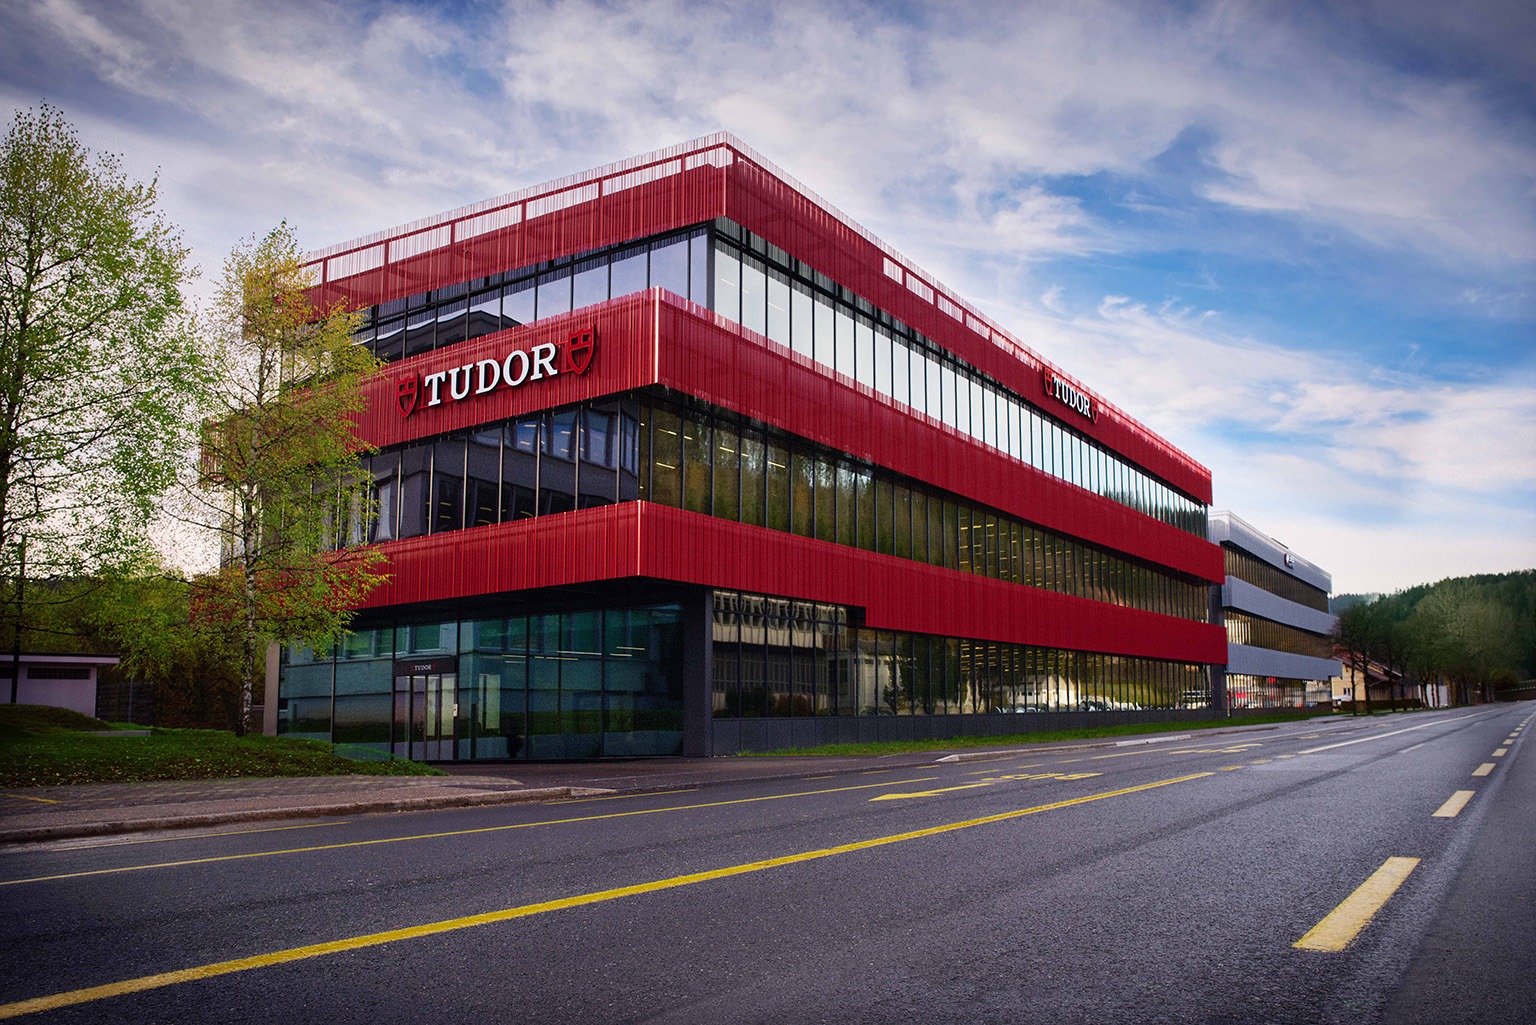 By combining new-age technology with age-old horological craftsmanship at the new Manufacture, TUDOR will be able to deliver top-notch creations consistently to clients.